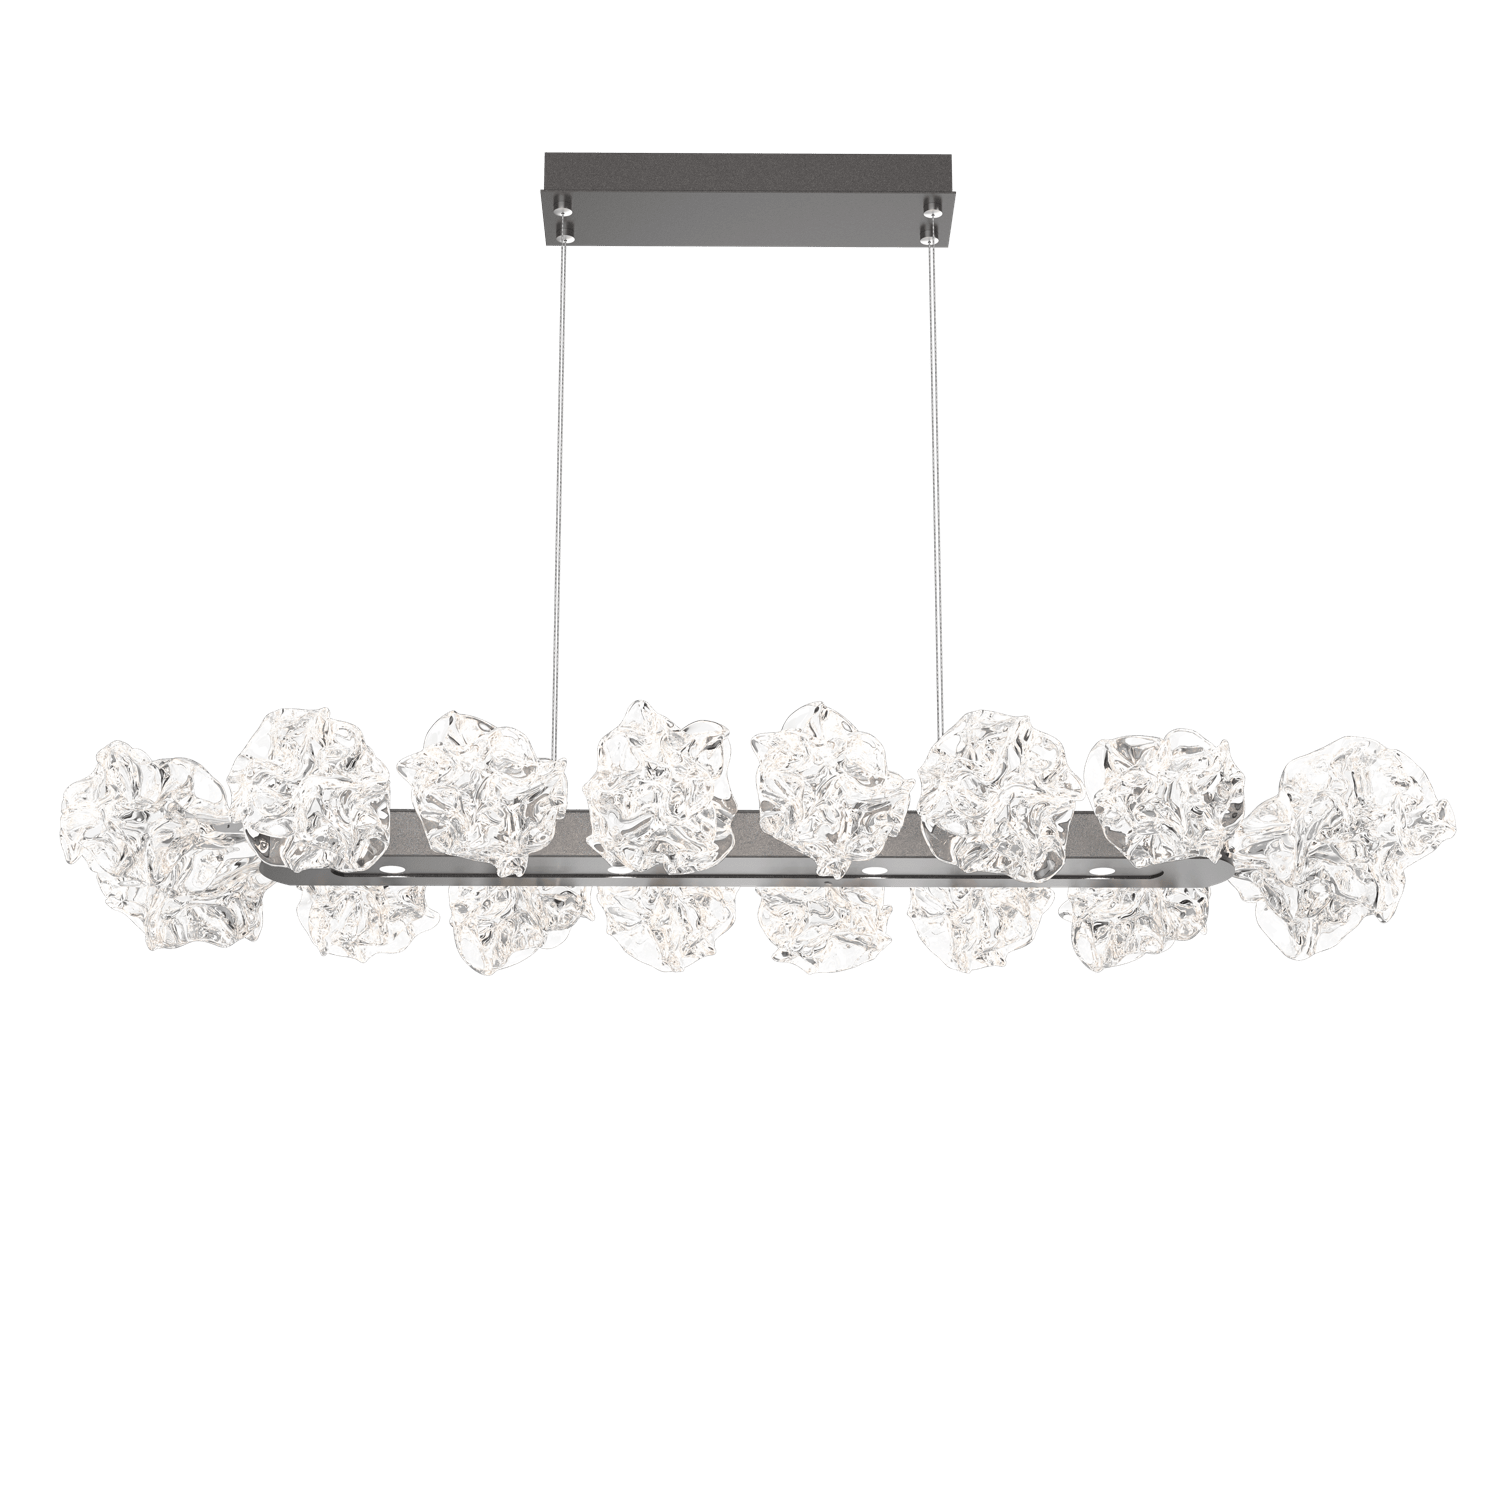 PLB0059-48-GP-Hammerton-Studio-Blossom-48-inch-linear-chandelier-with-graphite-finish-and-clear-handblown-crystal-glass-shades-and-LED-lamping